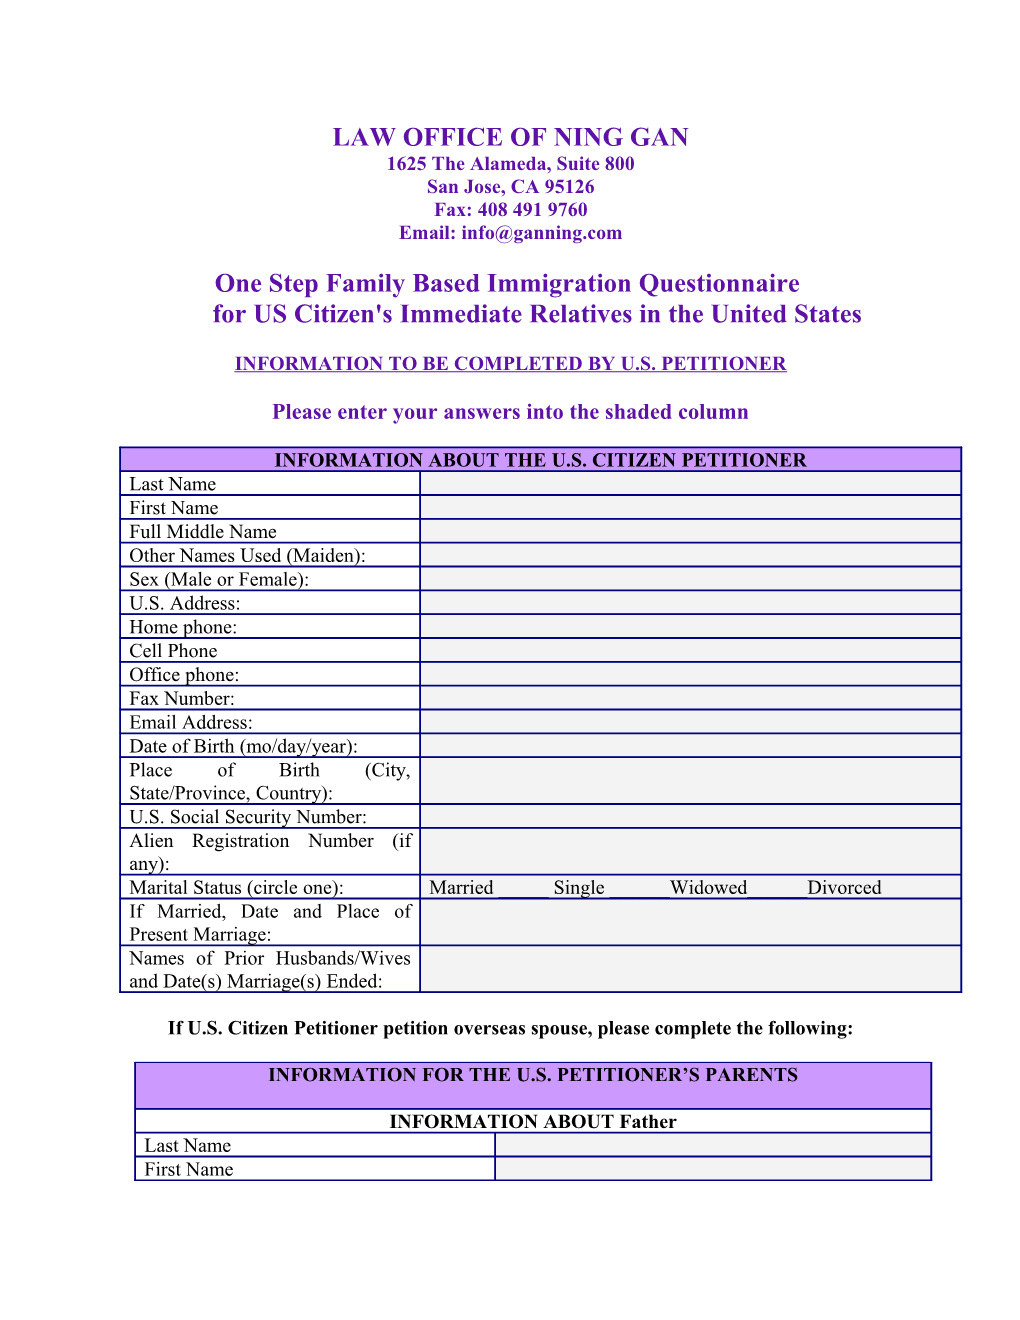 One Step Family Based Immigration Questionnaire